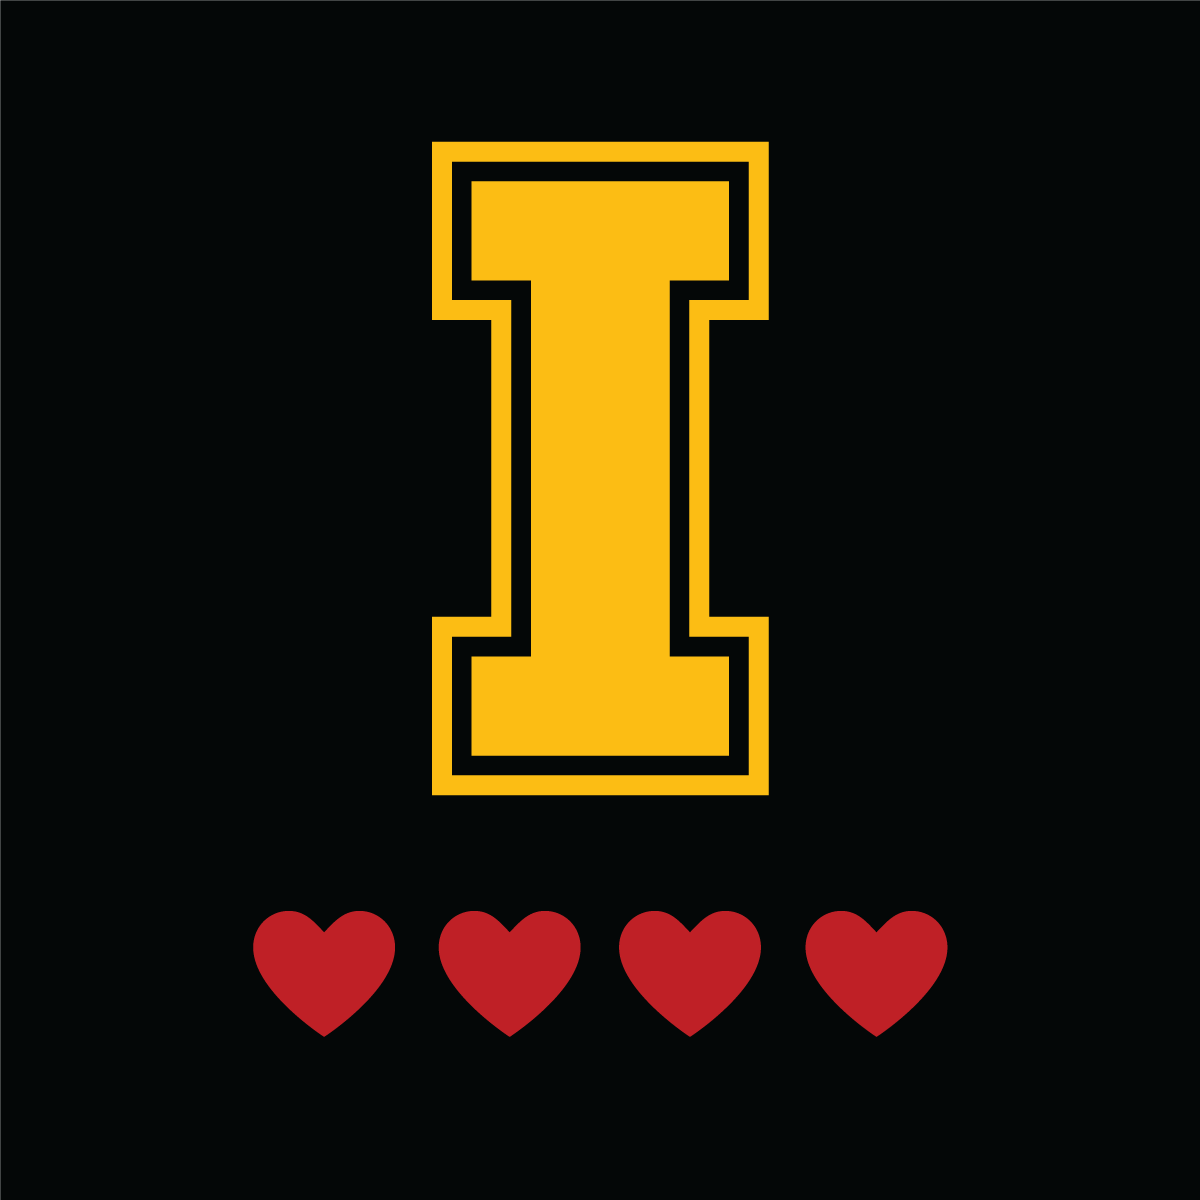 I logo with four red hearts